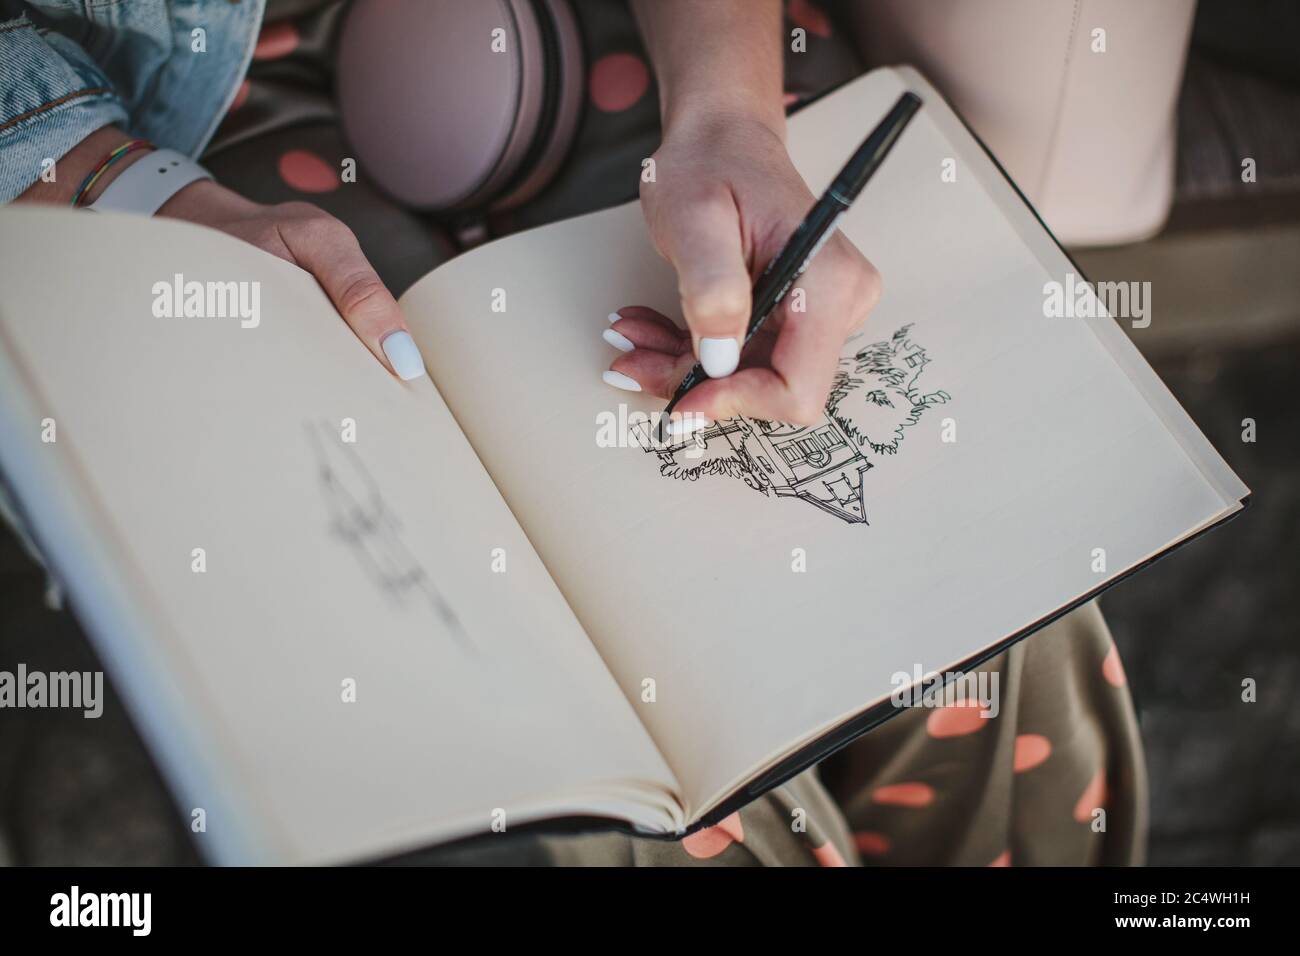 Sketchbook with a drawing of a house close-up. Girl draws with her left hand. Stock Photo